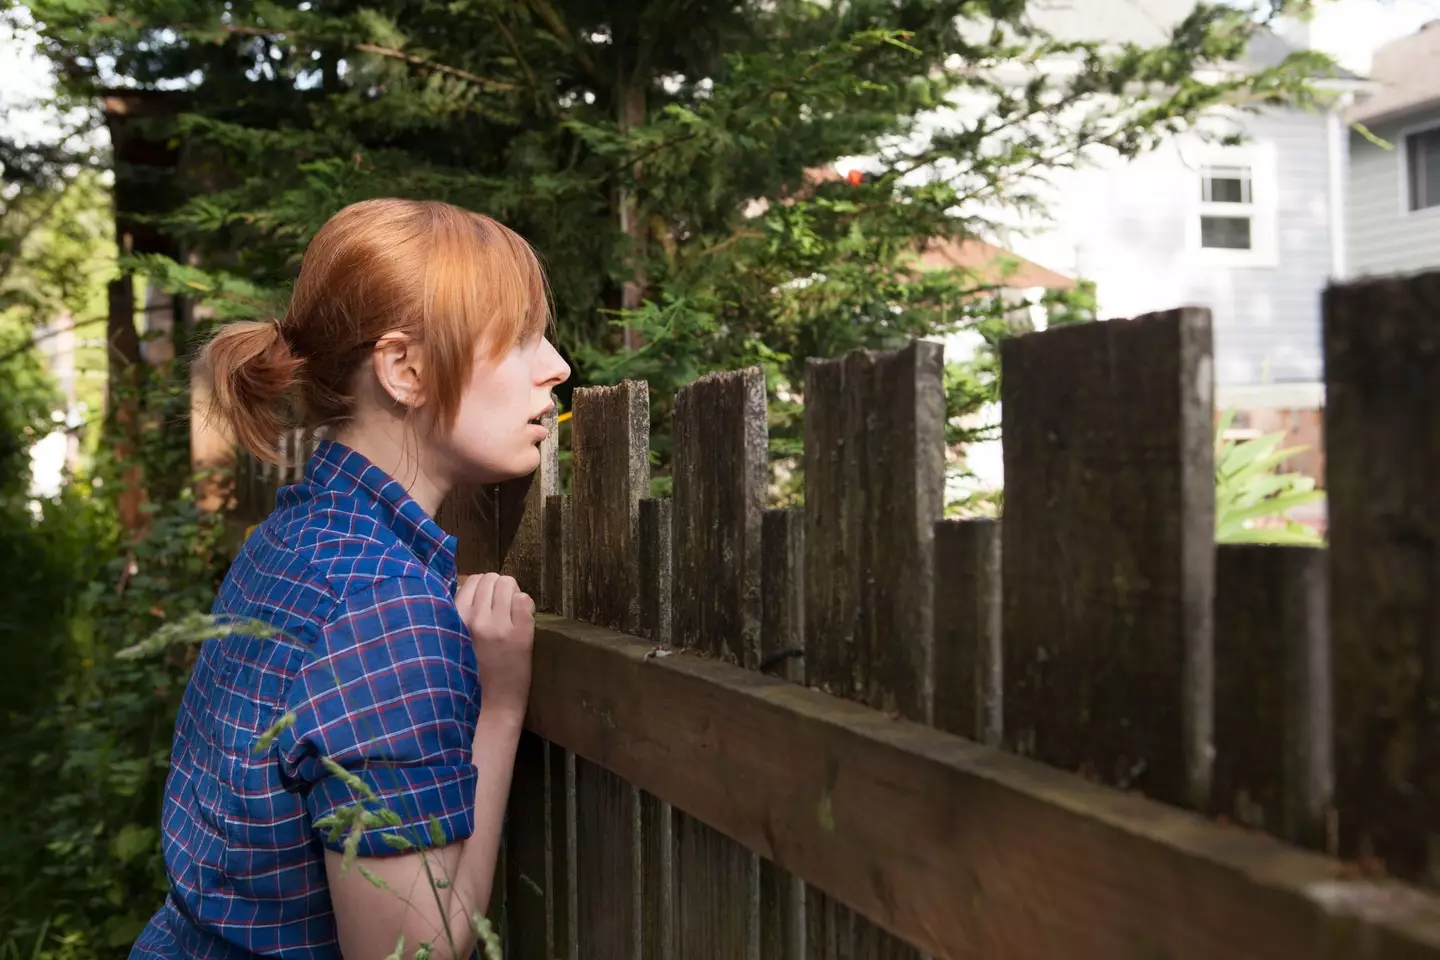 Shannon is legally required to pay for the fence (stock image).